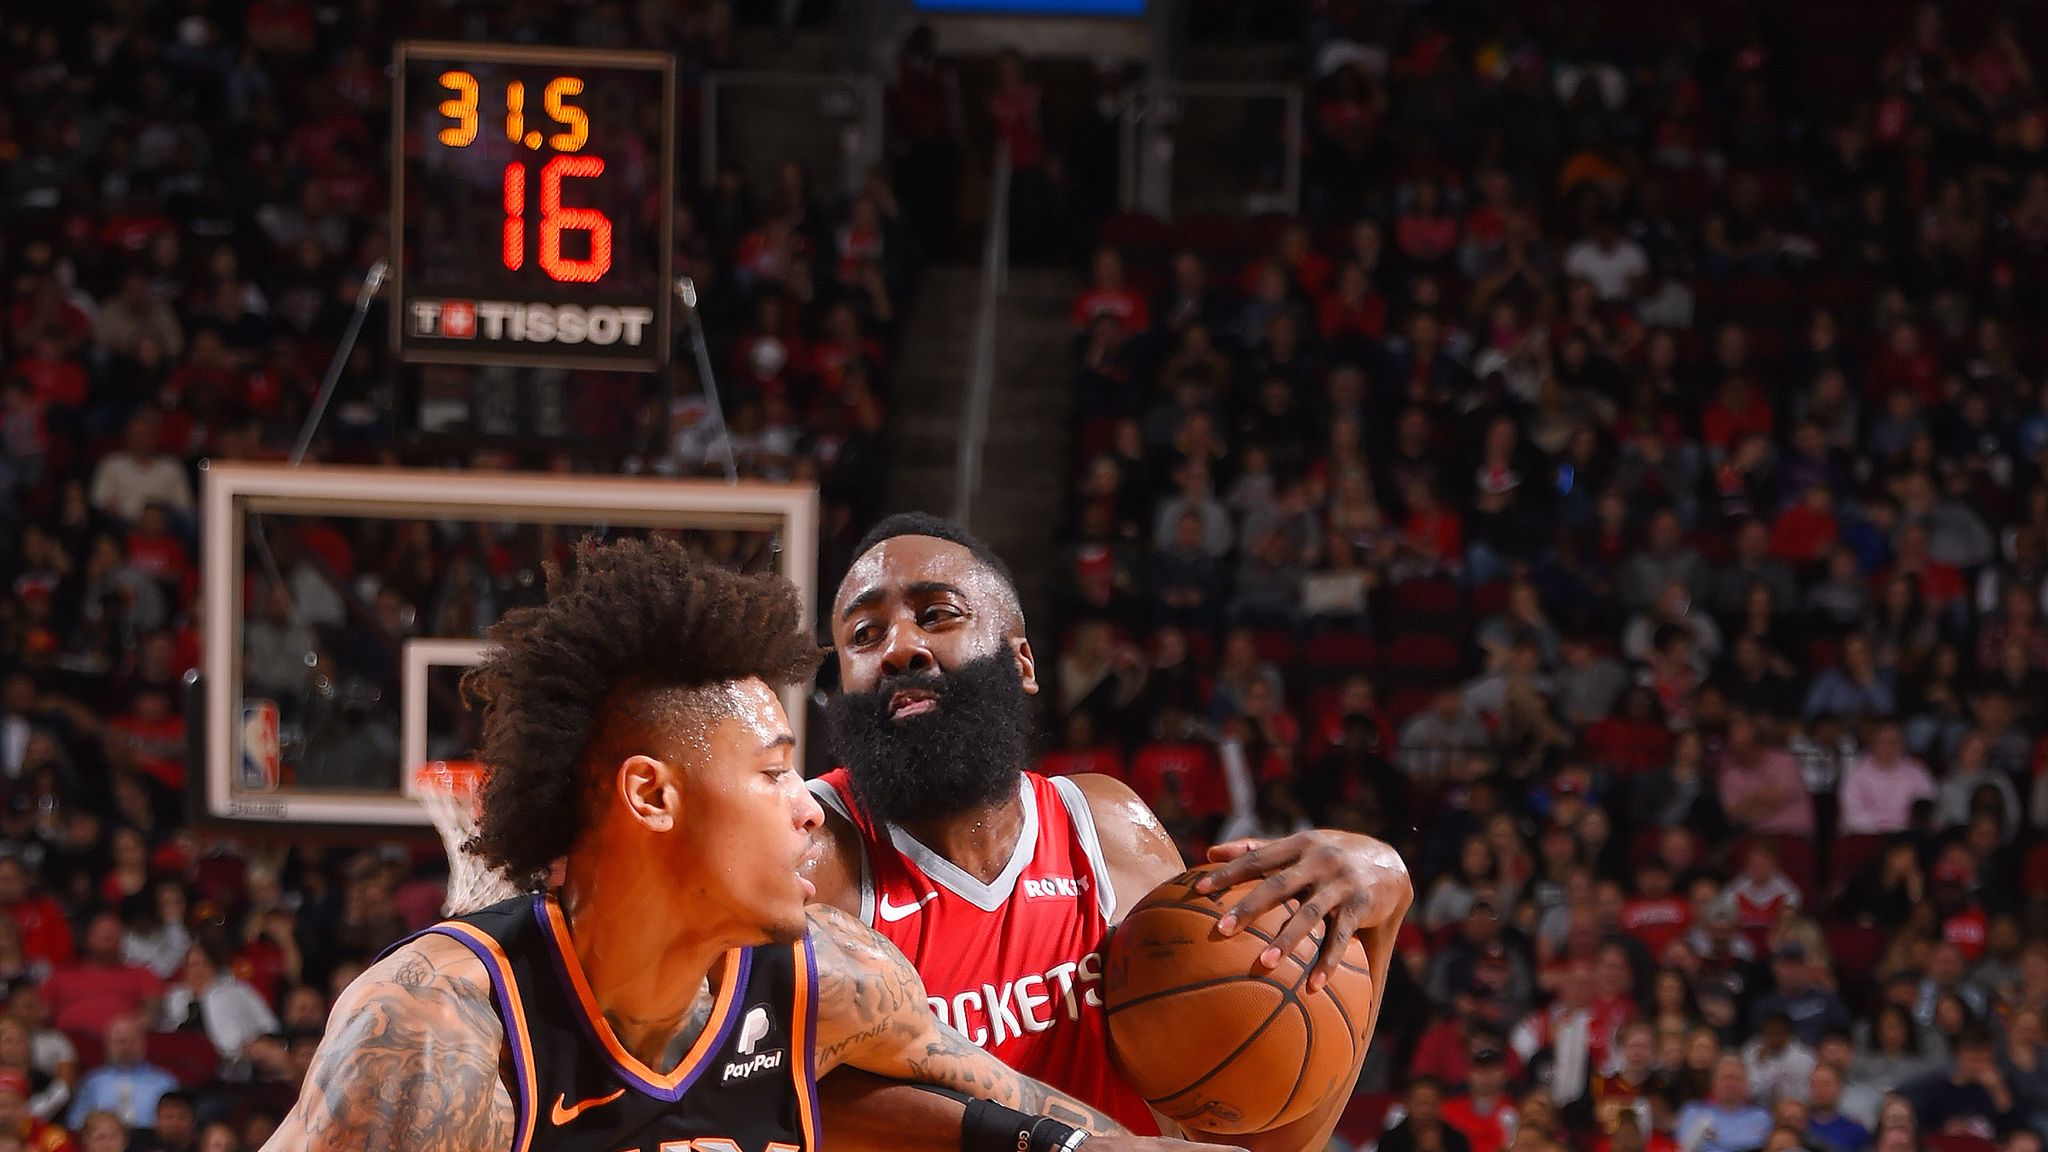 James Harden lived up to the high expectations in his first two